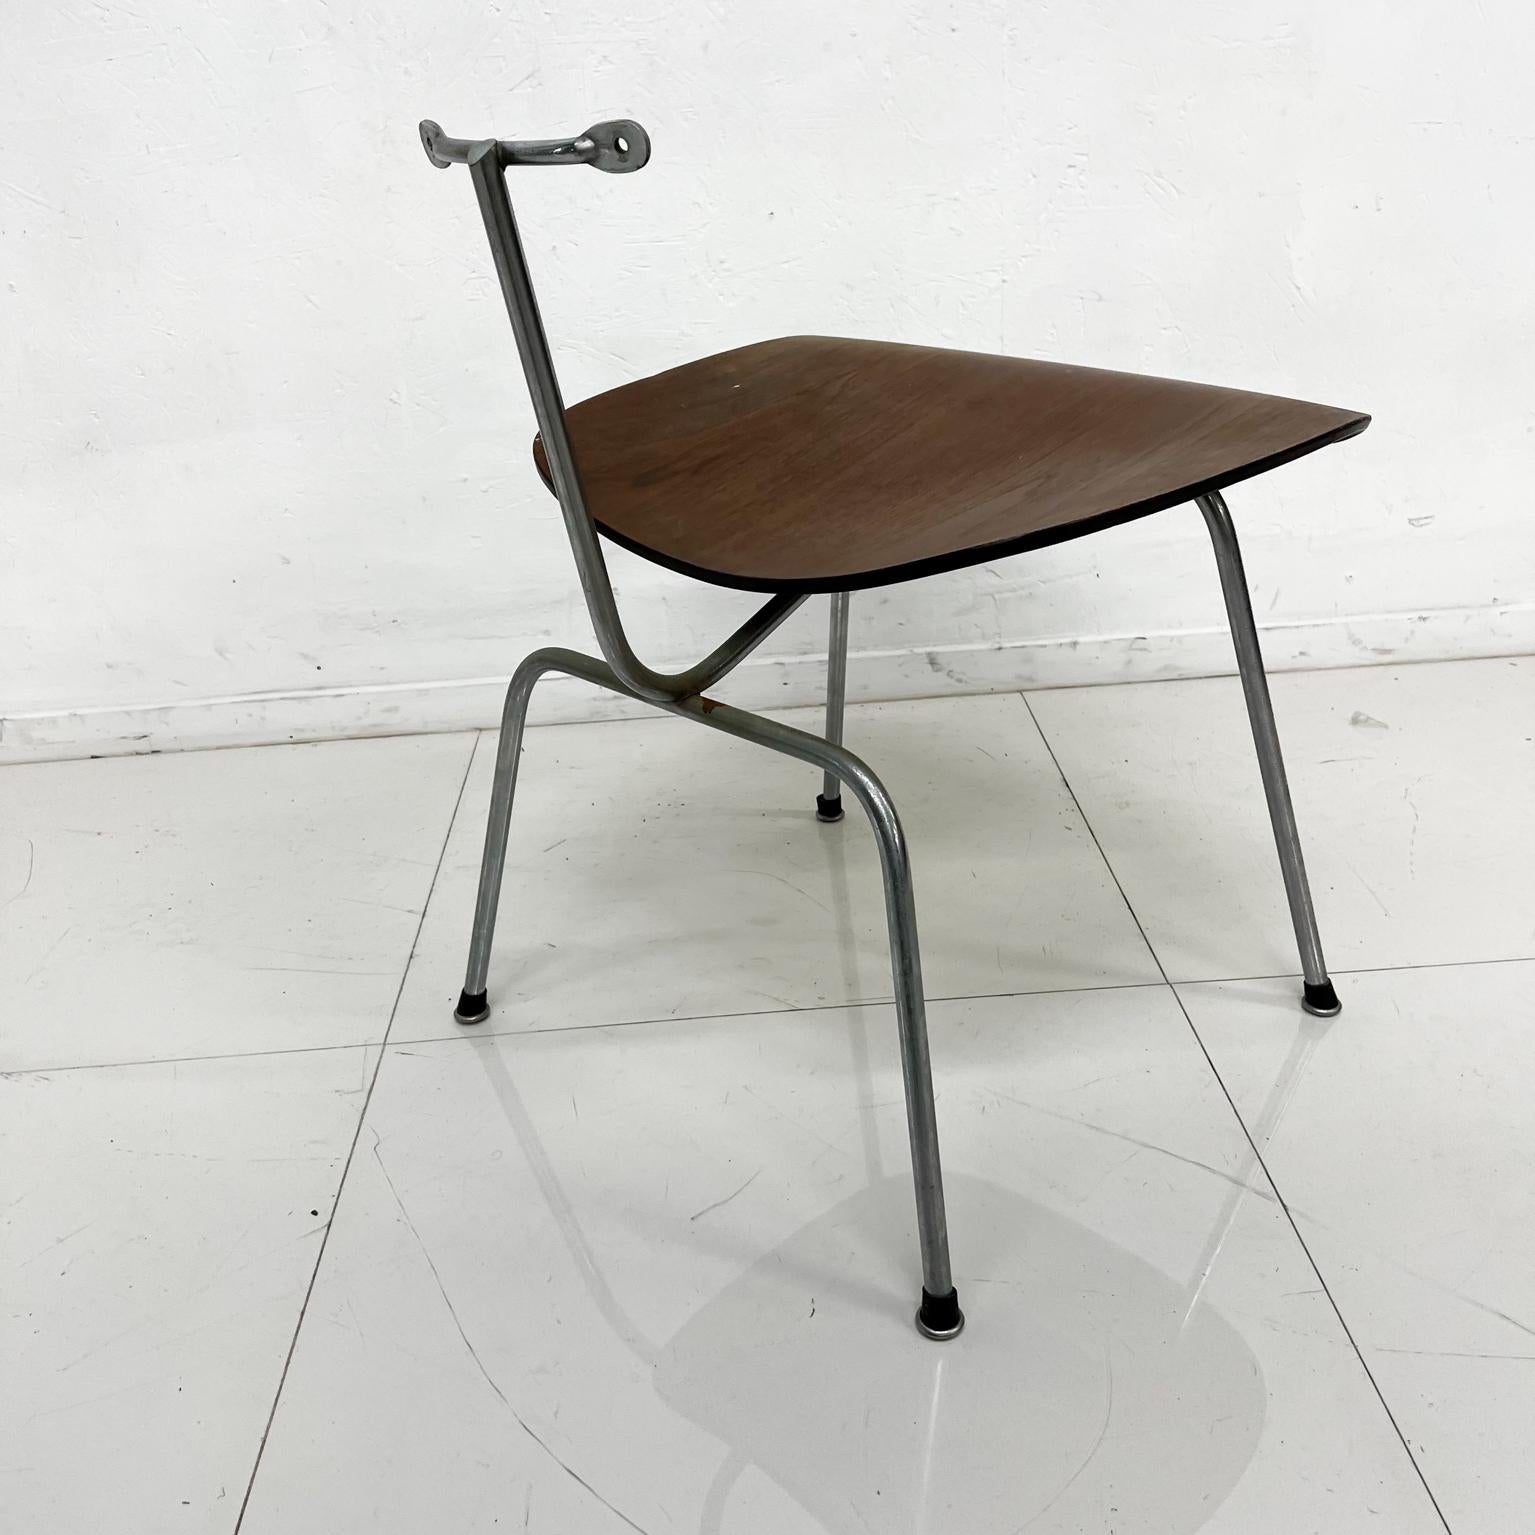 Mid-20th Century 1950s Vintage Herman Miller Eames Molded Plywood Modern Chair